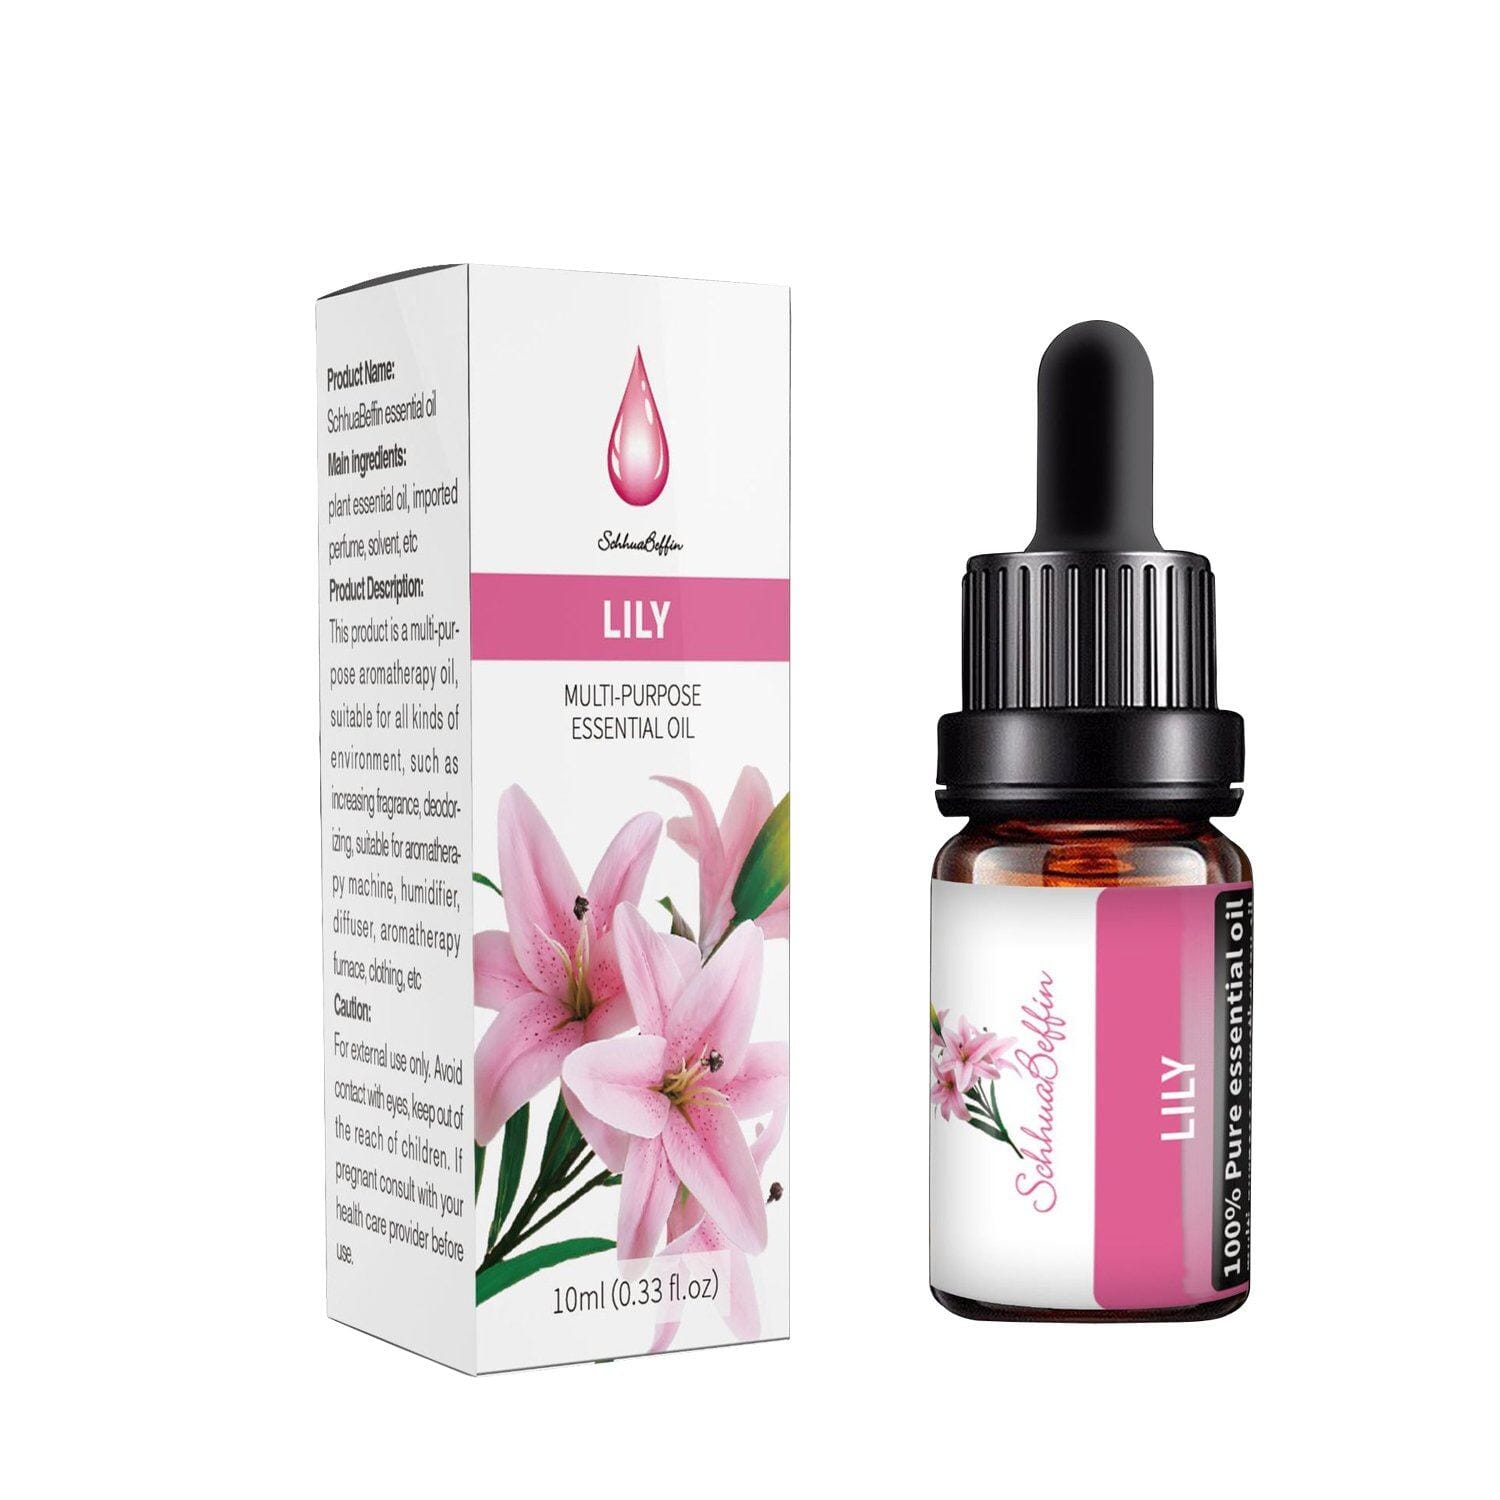 Multi-purpose 10ml Water Soluble Aromatherapy Essential Oil Default OEM Brand Lily 